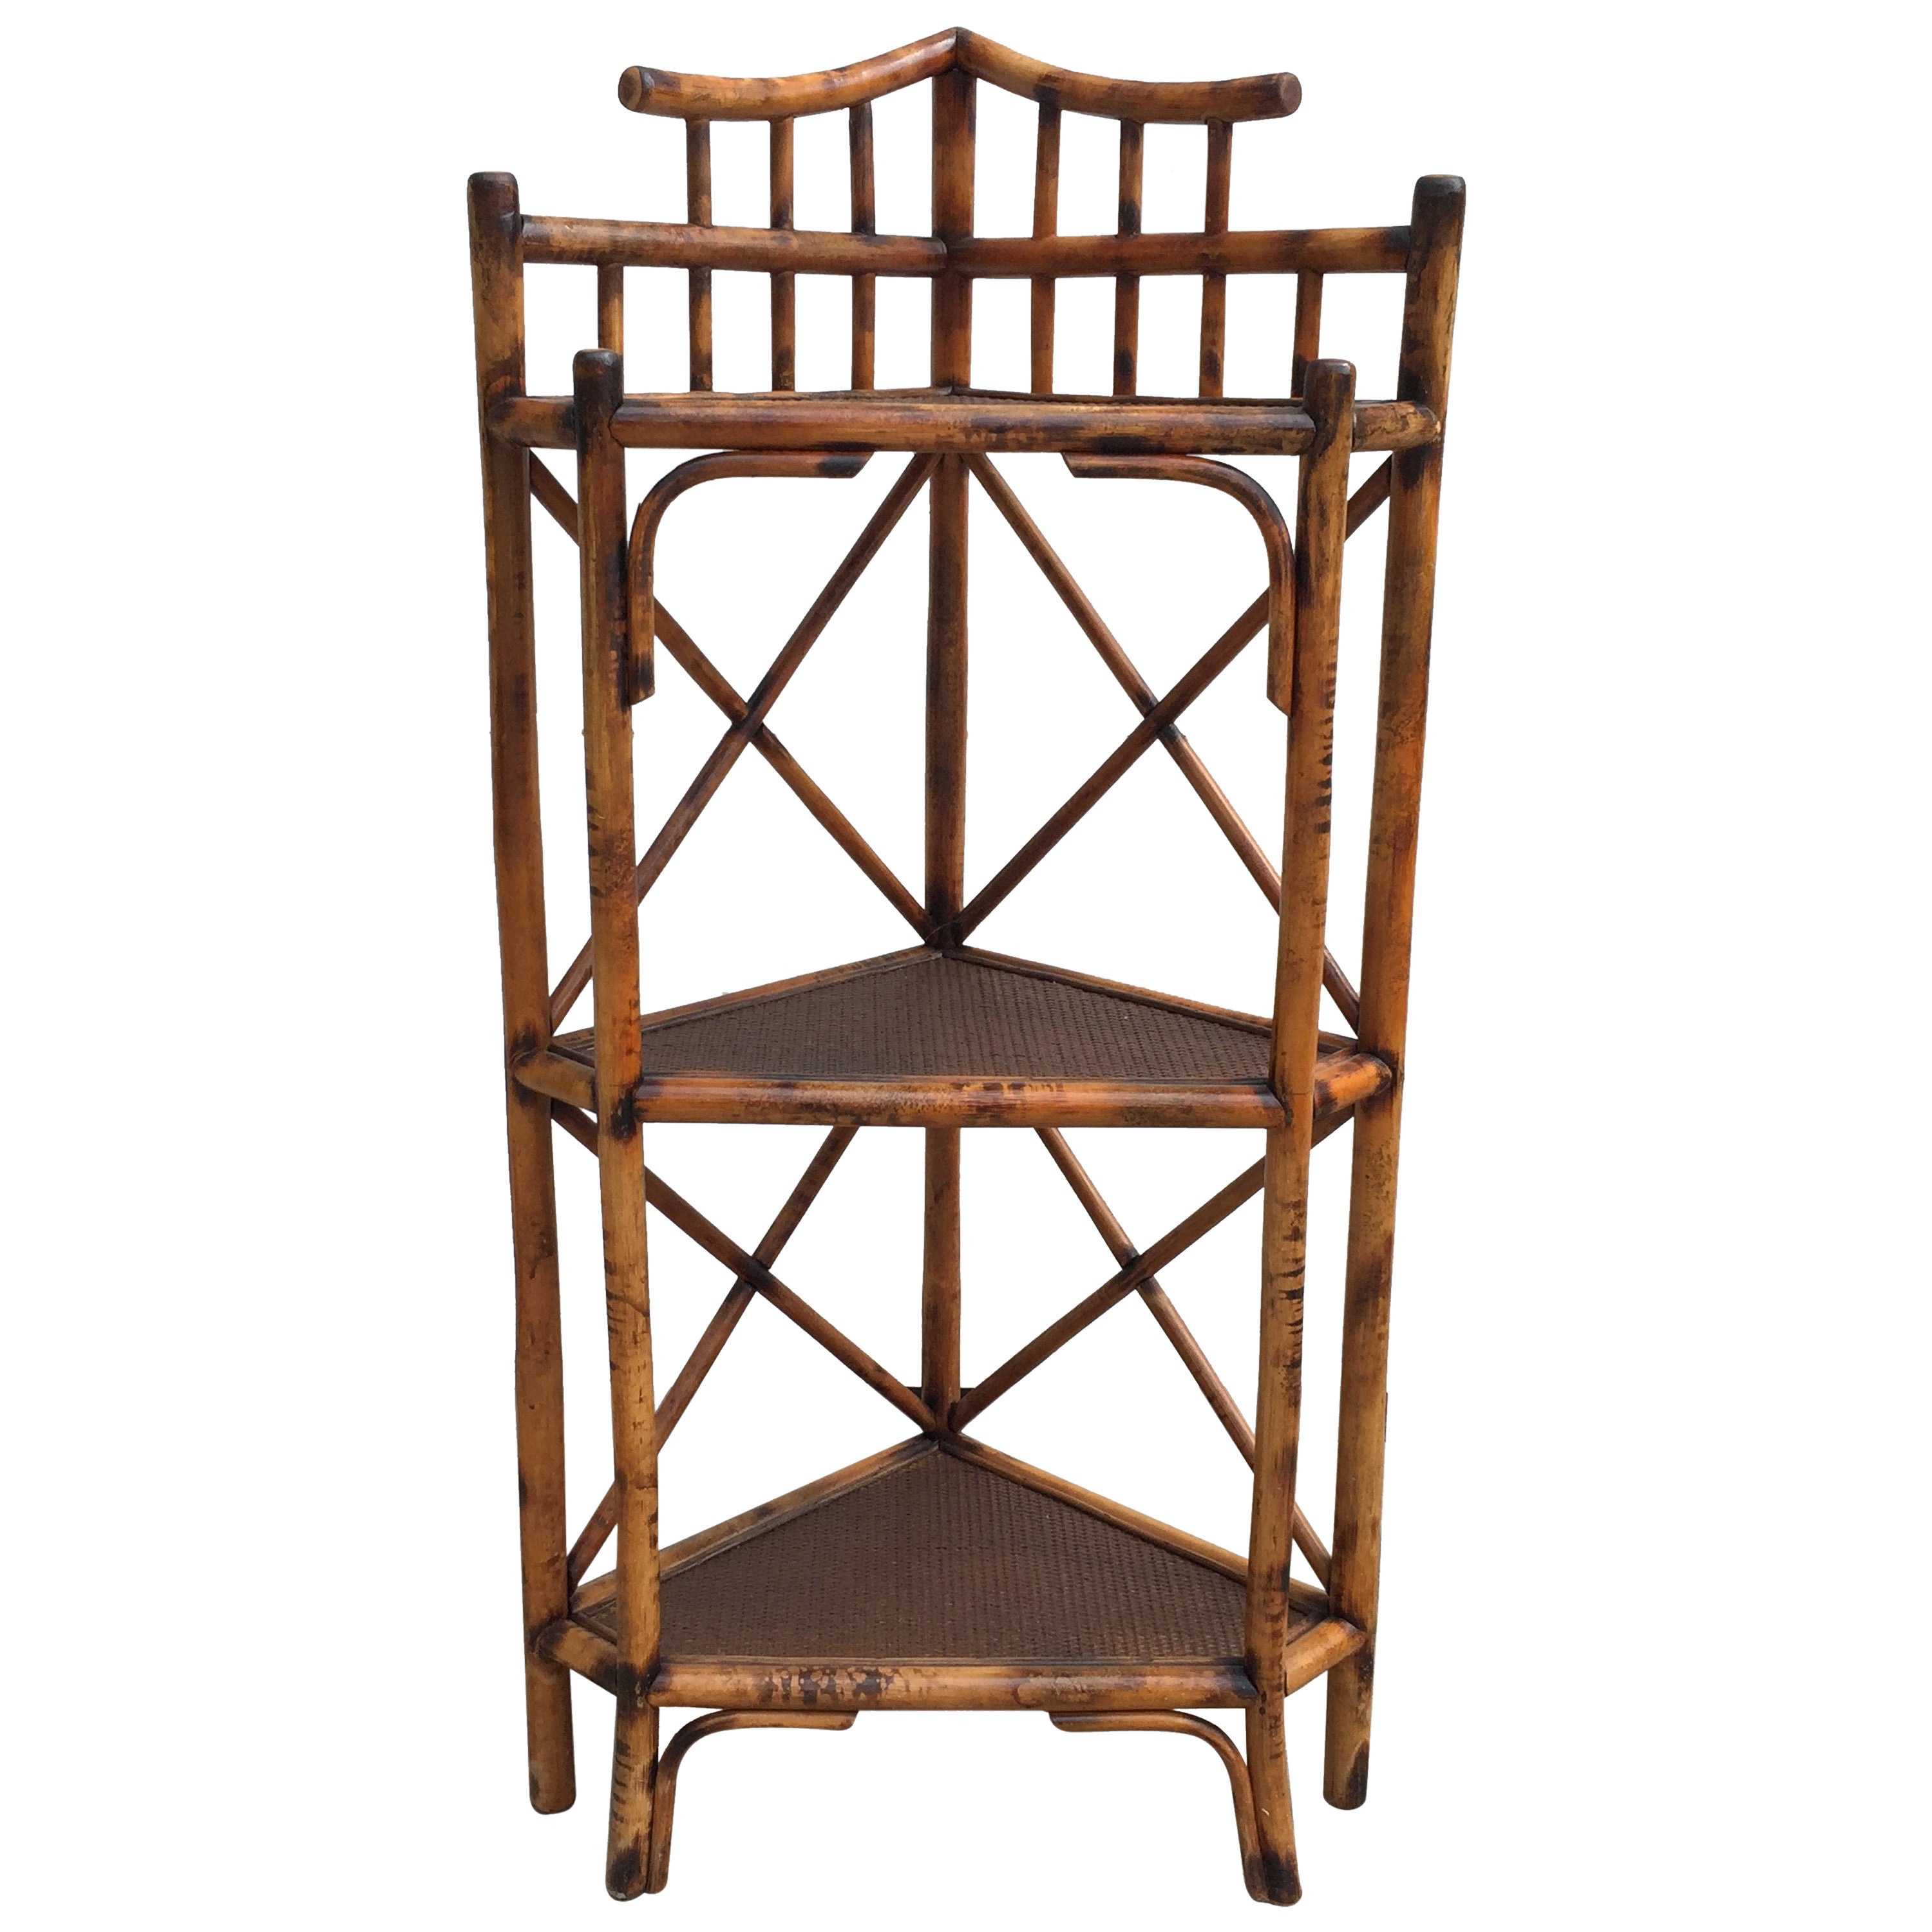 Three-Tiered Corner Etagere with Scorched Bamboo Frame and Rattan Shelves